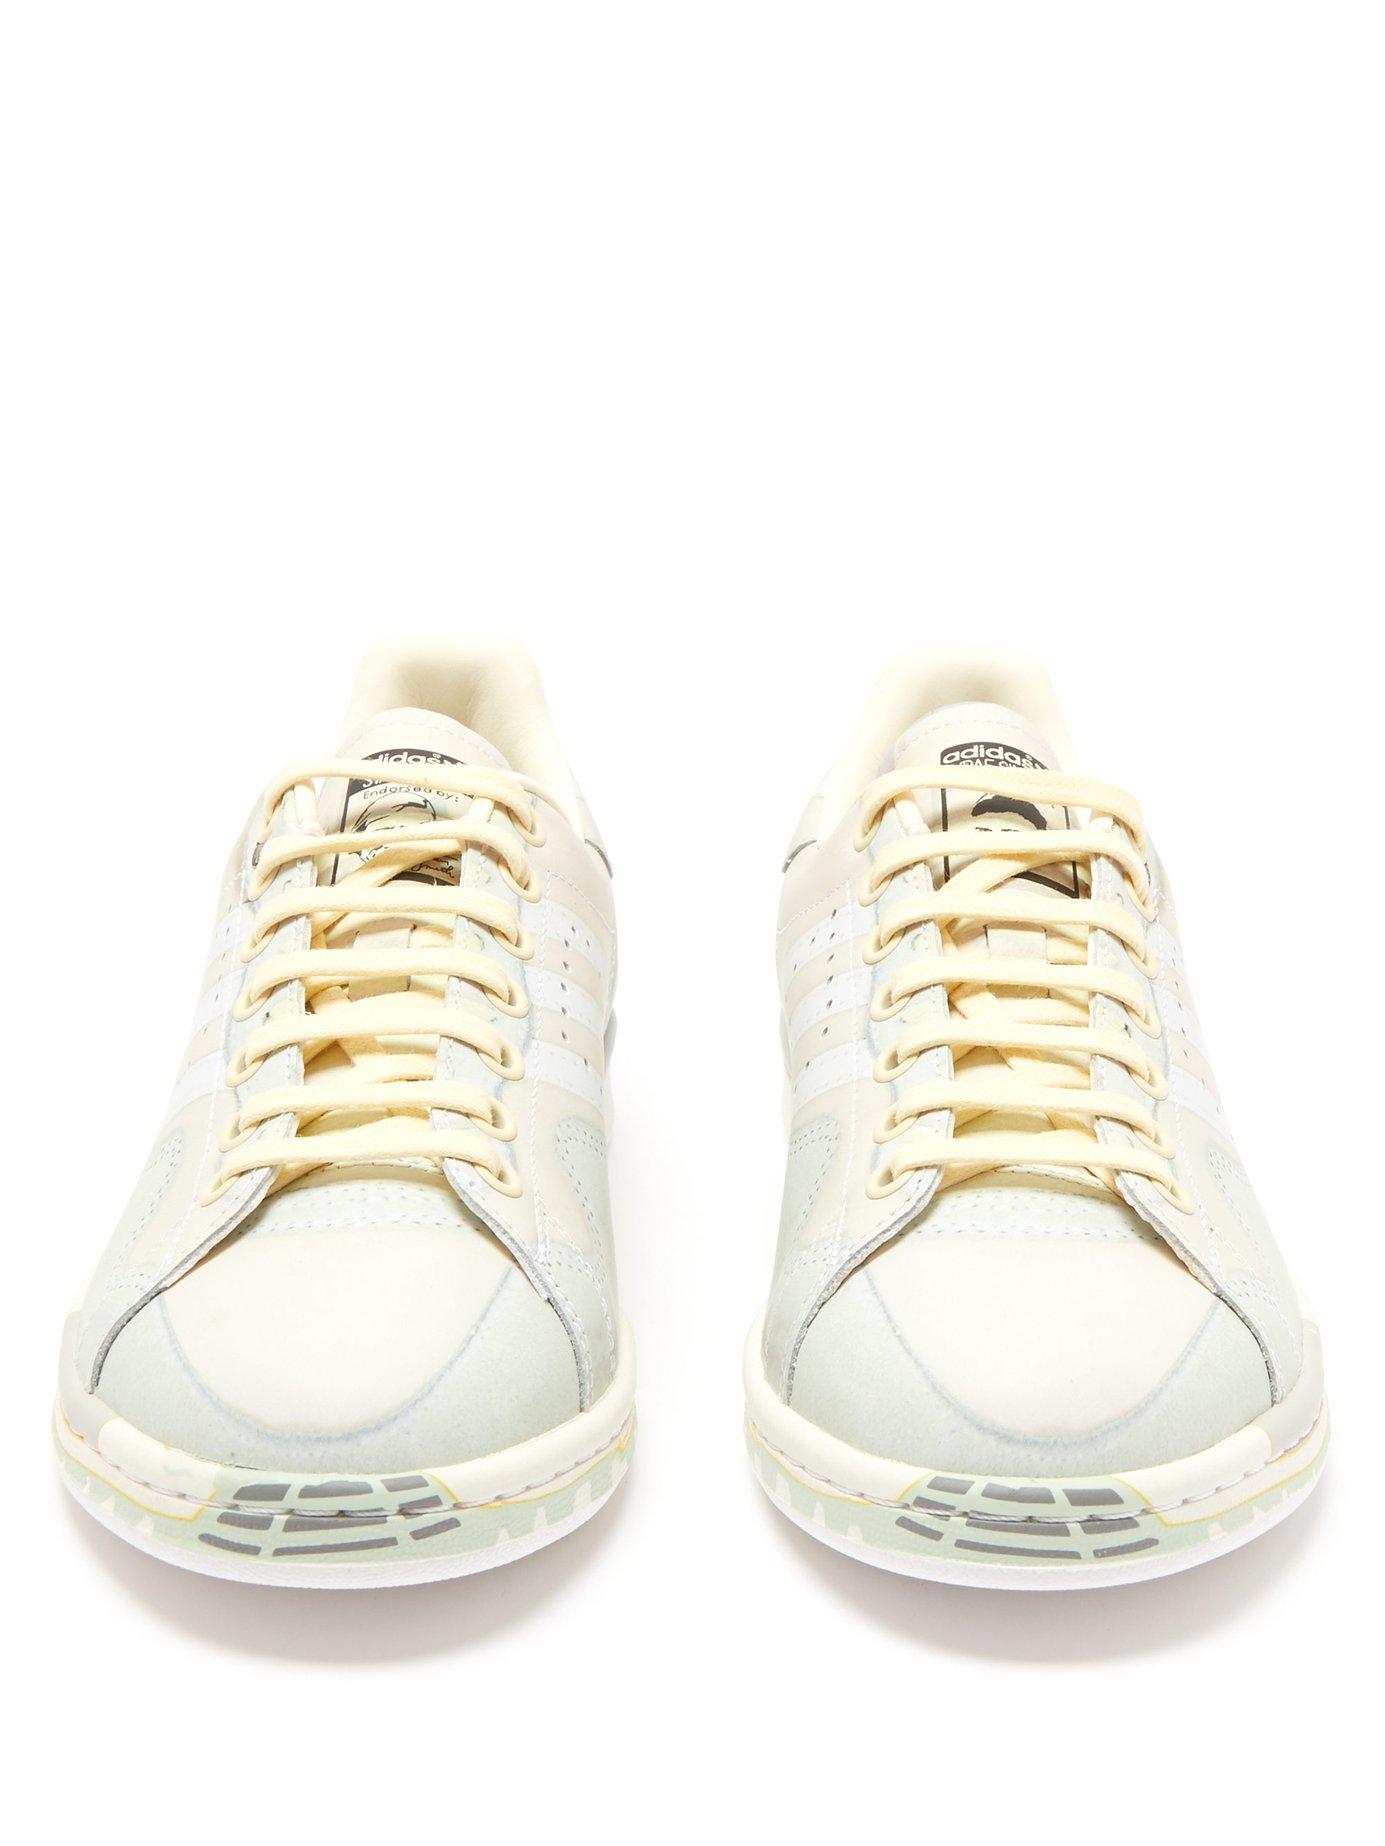 adidas By Raf Simons Leather Rs Peach Stan Smith Trainers in White - Lyst